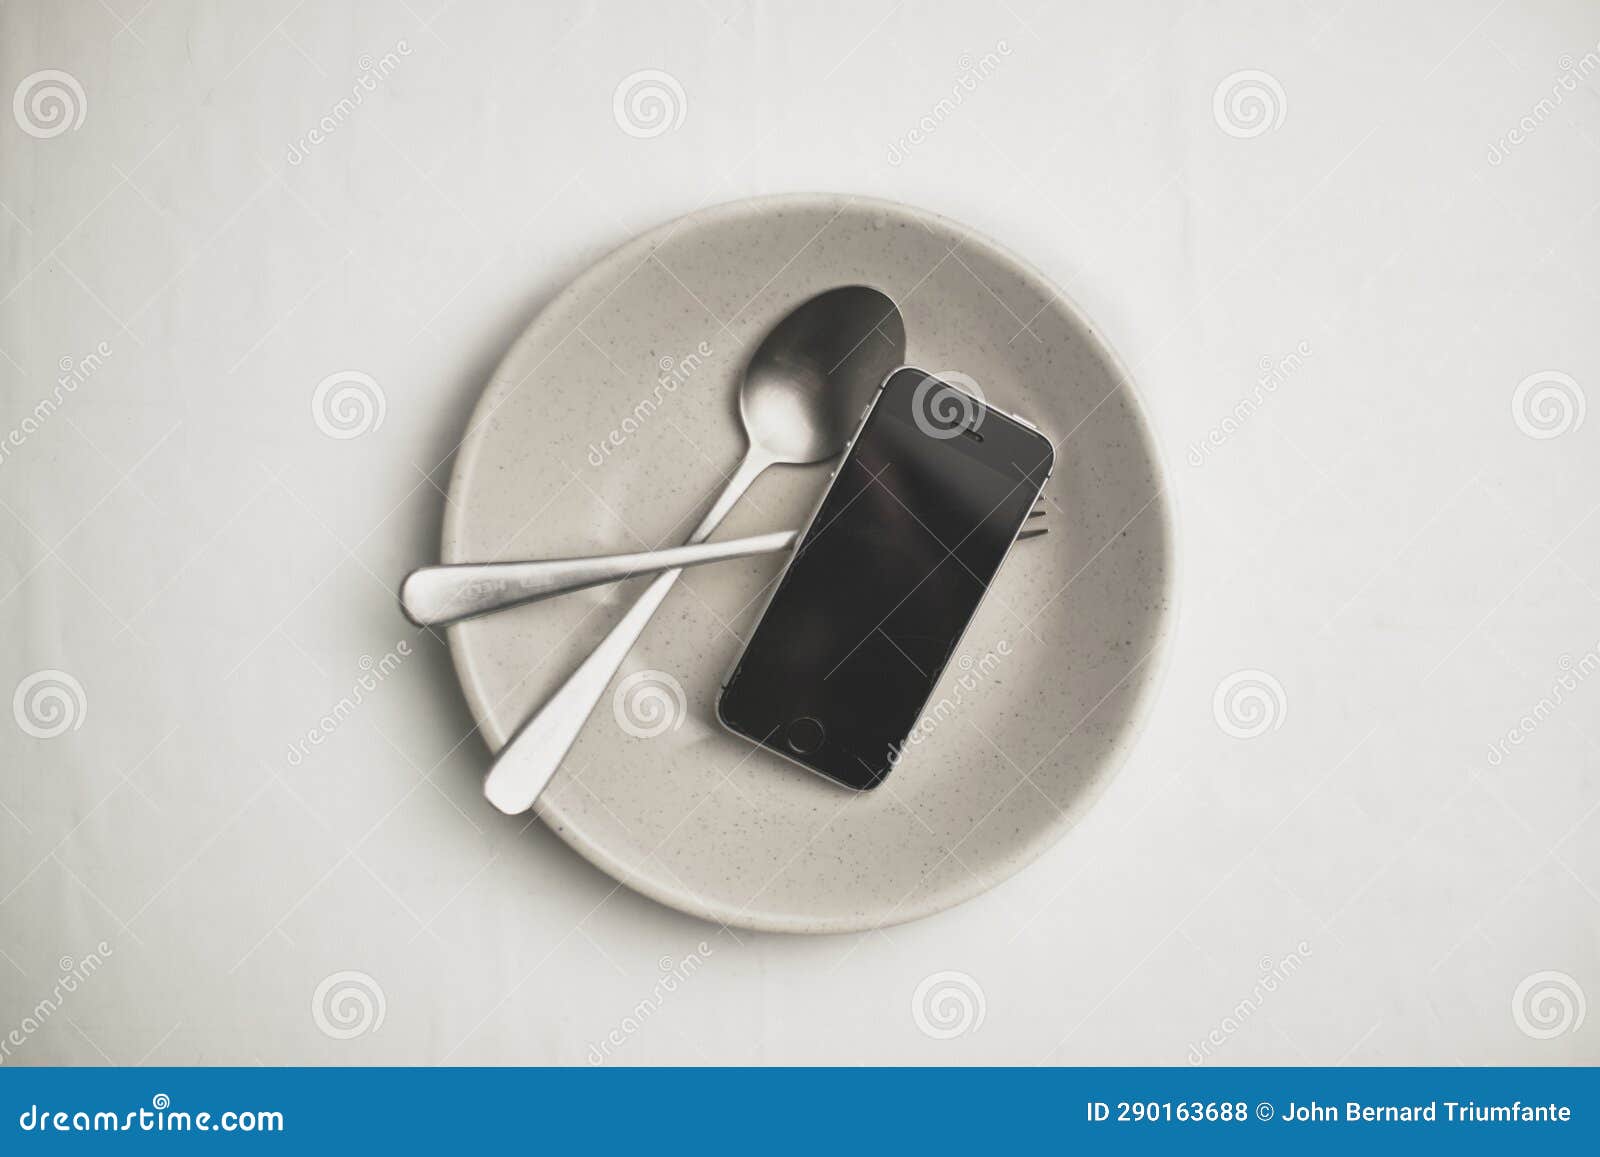 smartphone on a white plate with fork and knife. food delivery concept, top view, copy space. white background high key